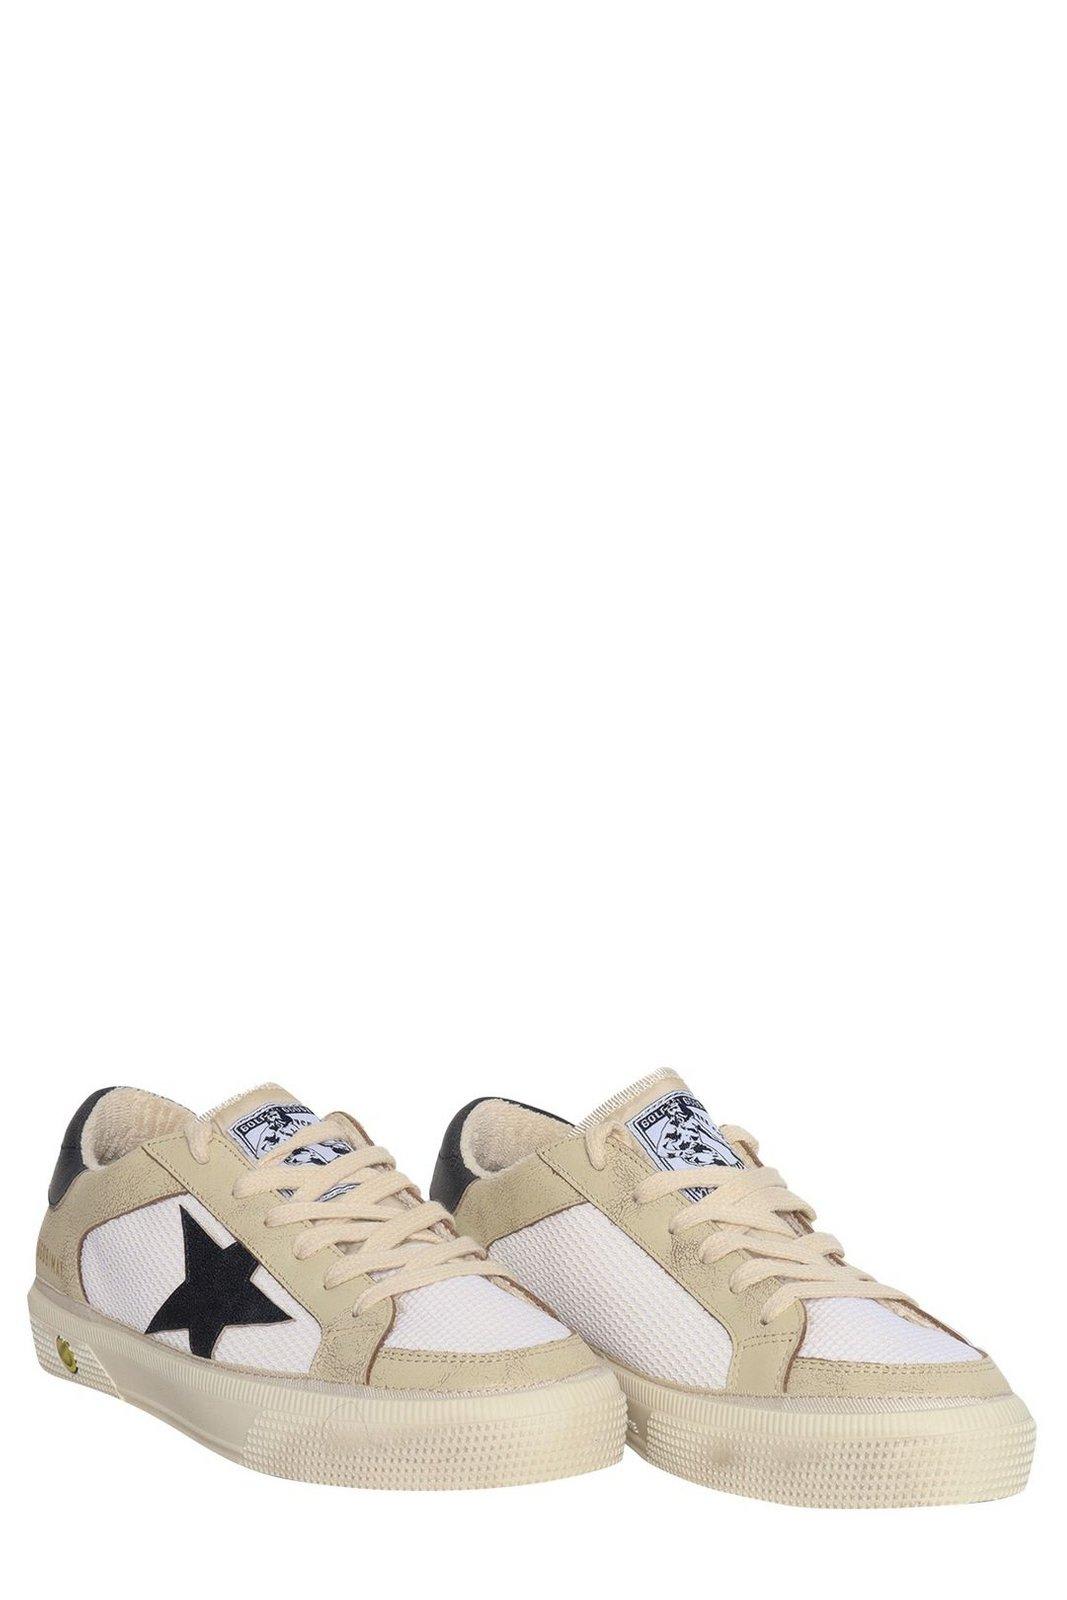 Shop Golden Goose Stardan Star Patch Distressed Sneakers